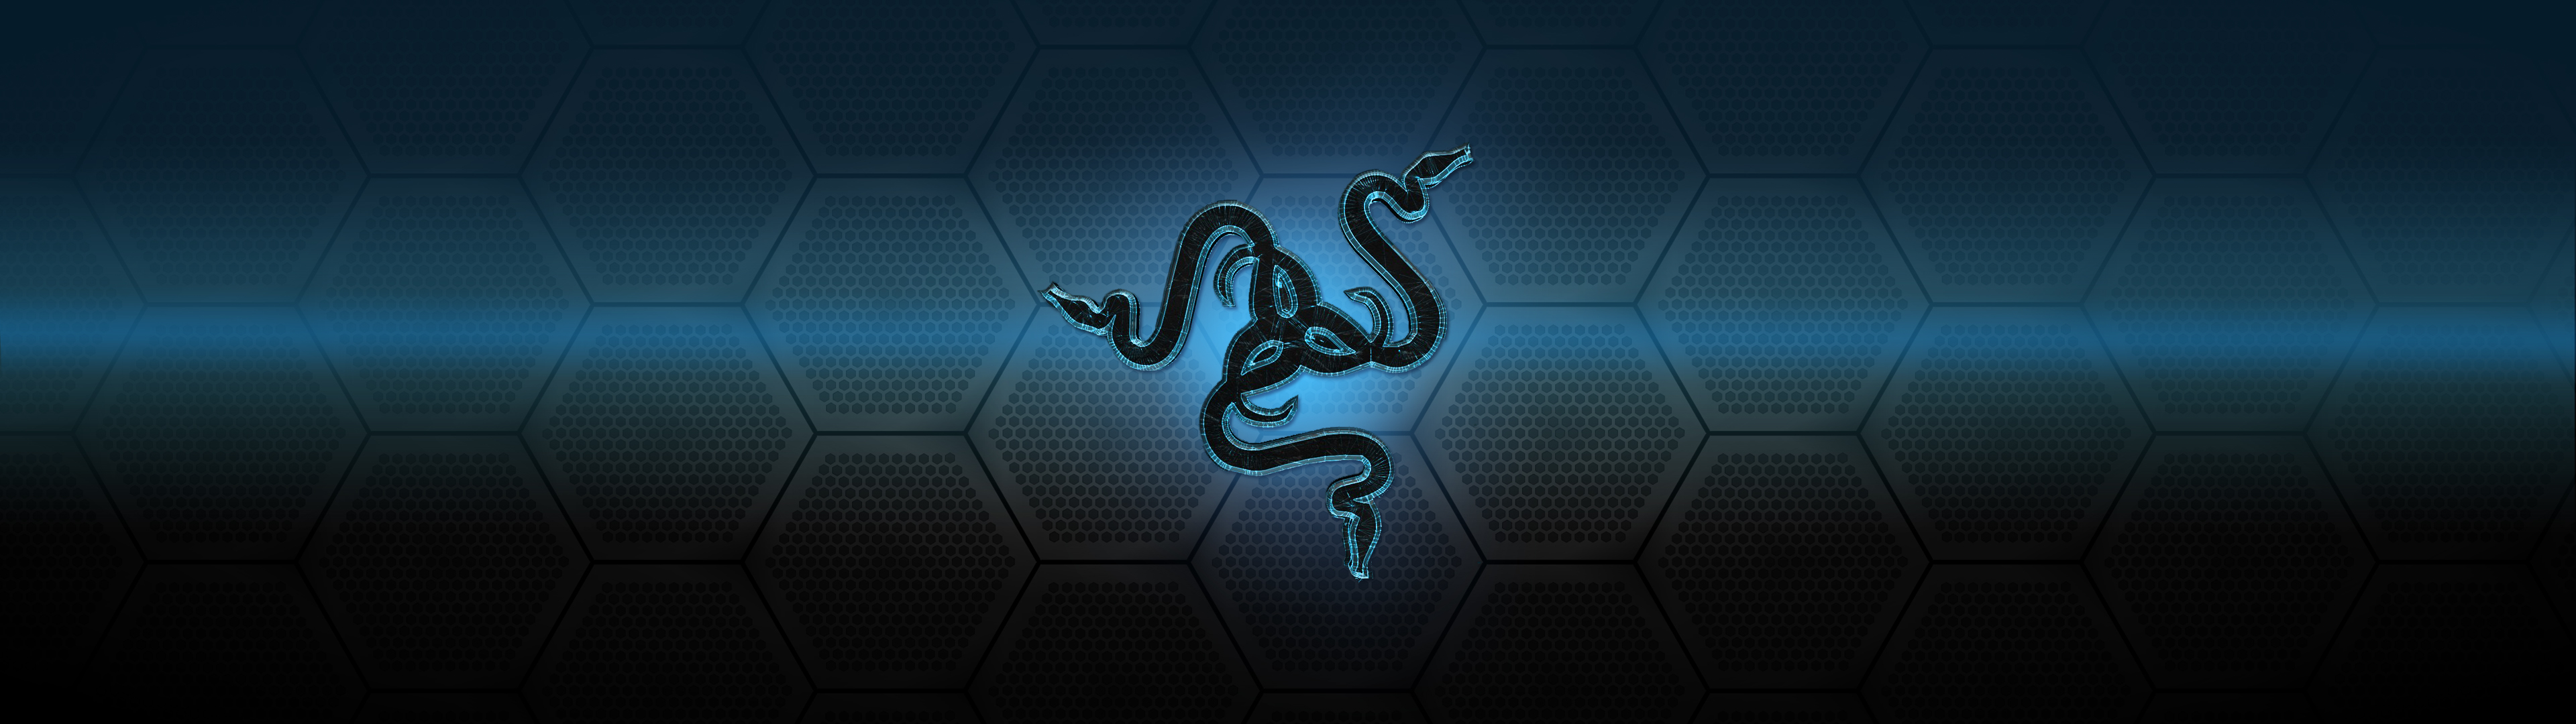 Razer wallpapers by wifsimster 3840x1080